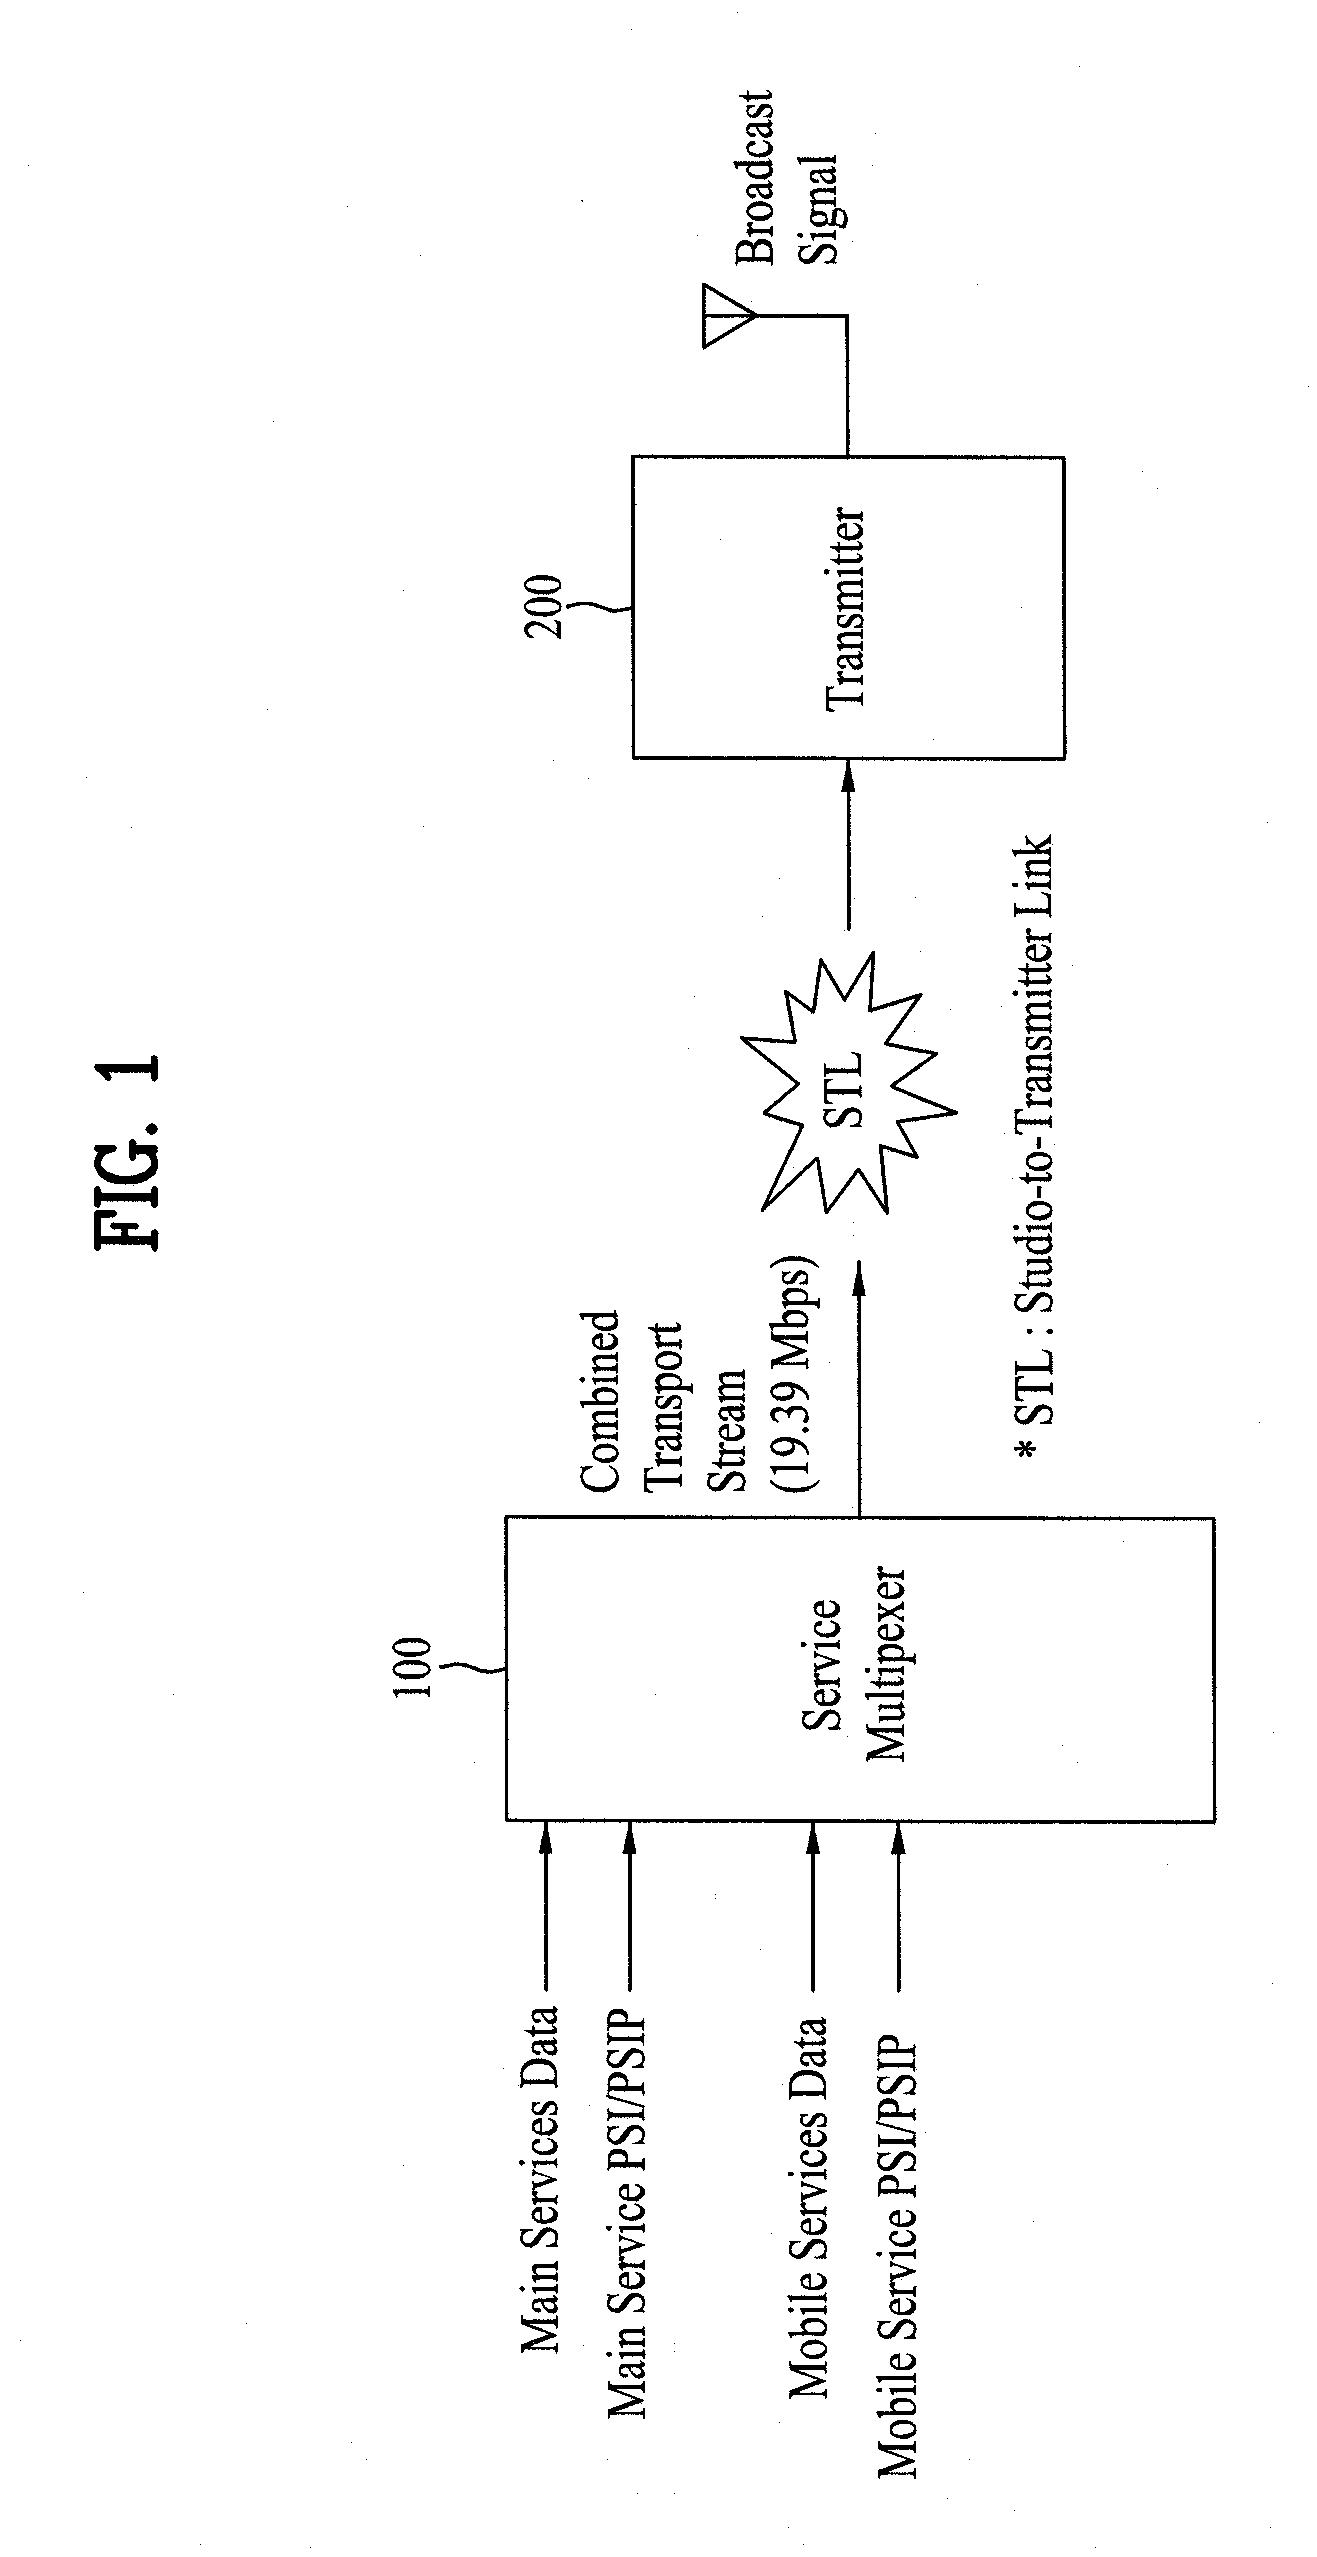 Method of controlling and apparatus of receiving mobile service data